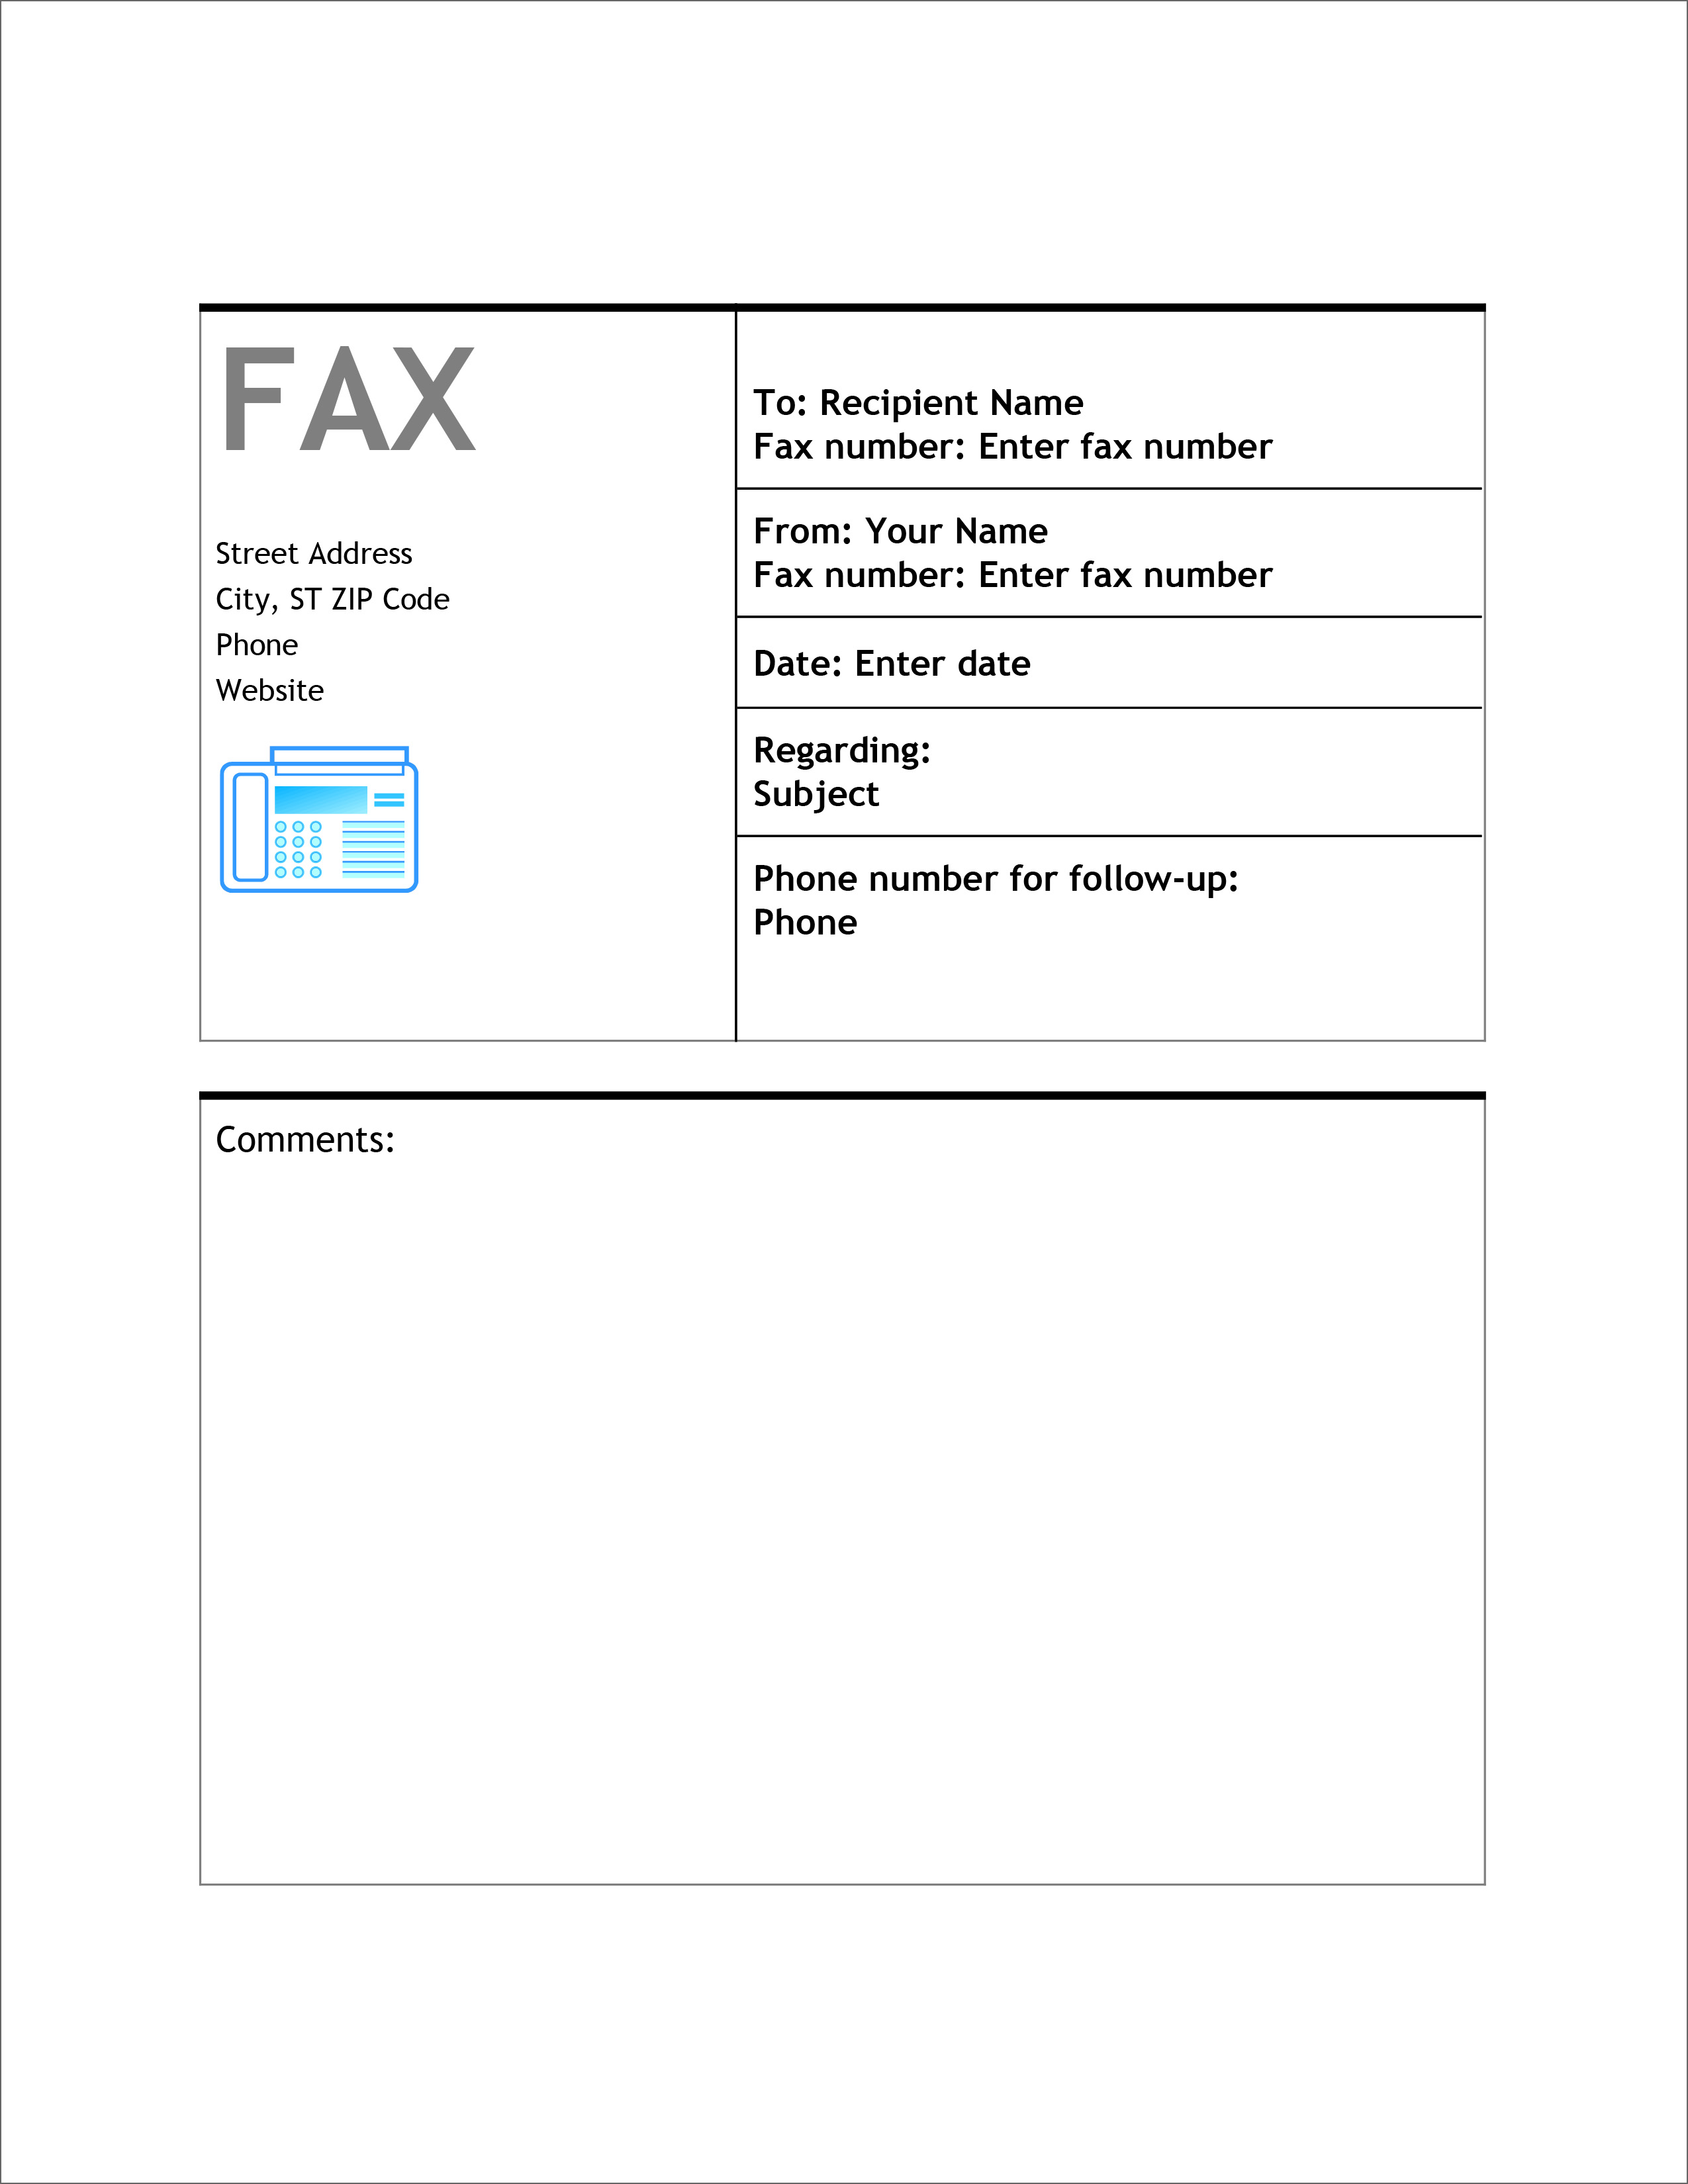 fax from macbook pro free